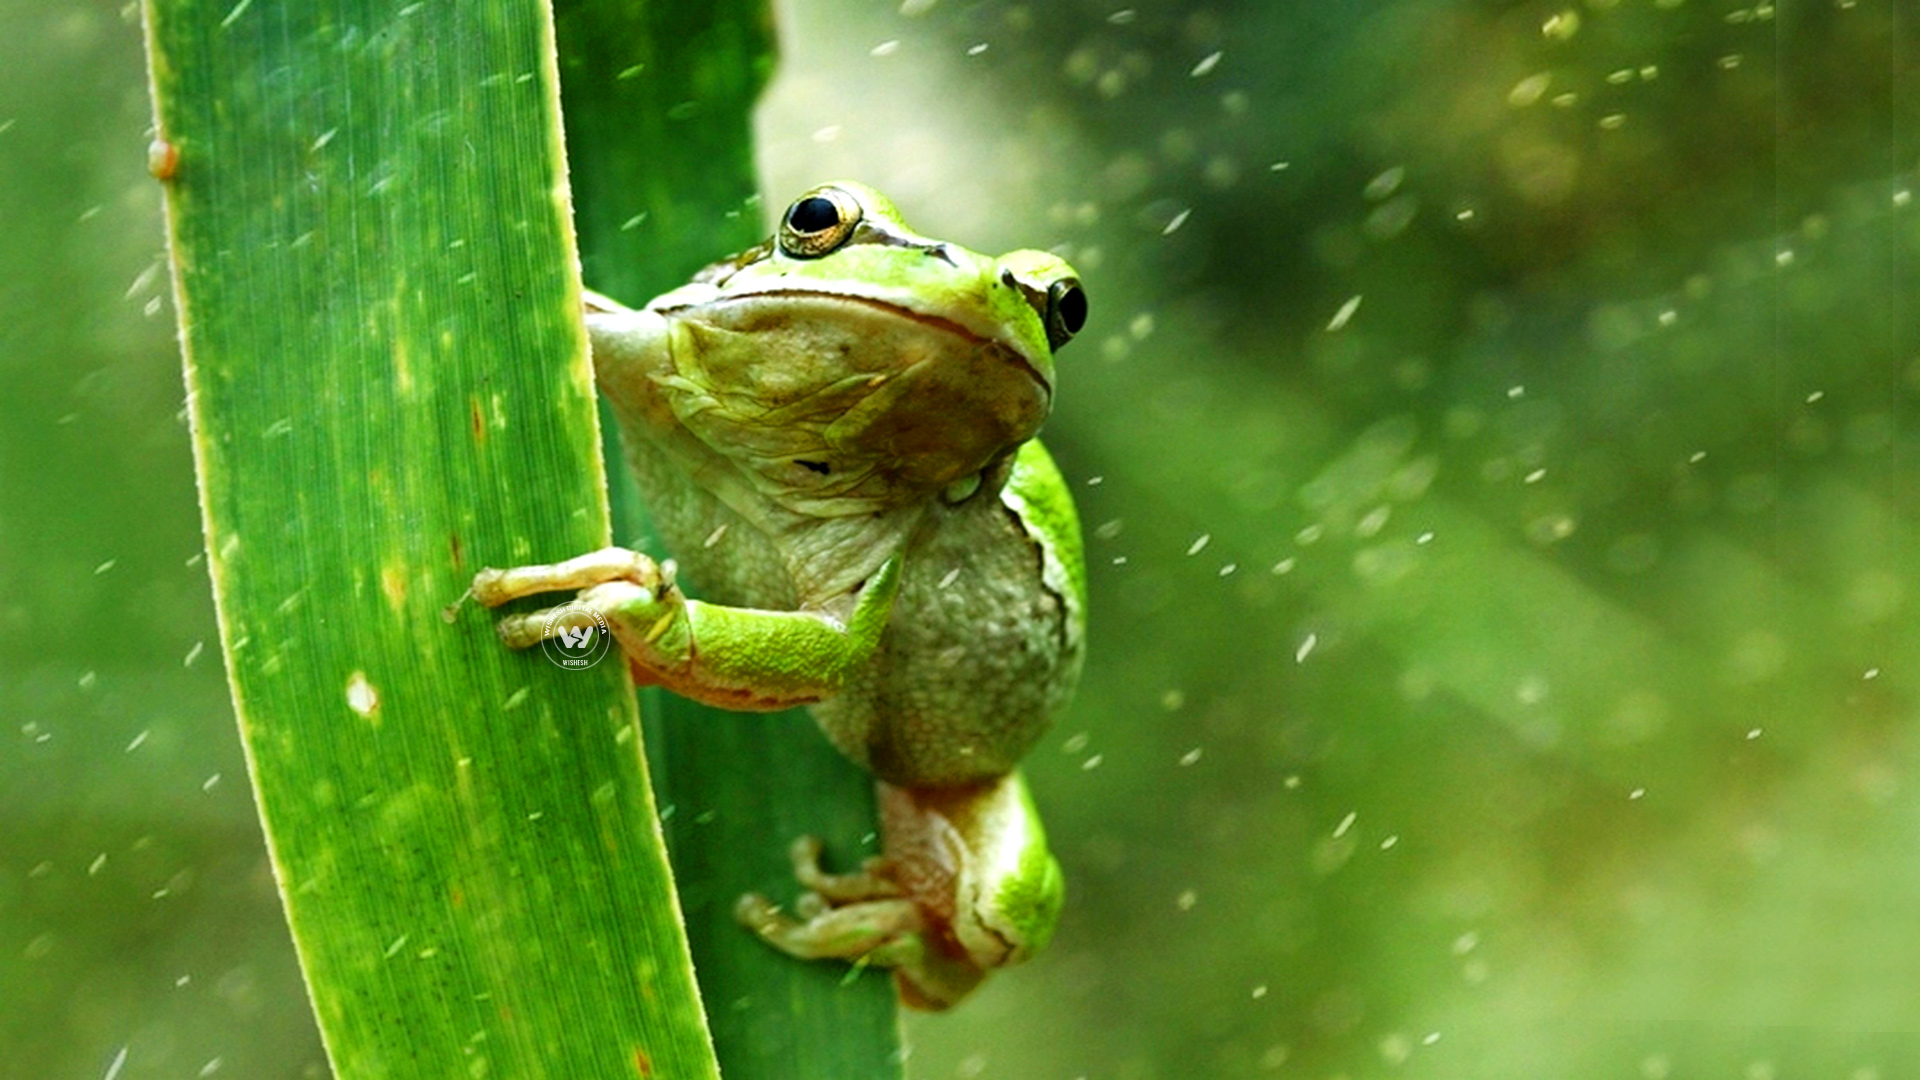 Frog in the rain | Frog in the rain wallpapers | Frog in the rain wallpapers | Wallpaper 2of 5